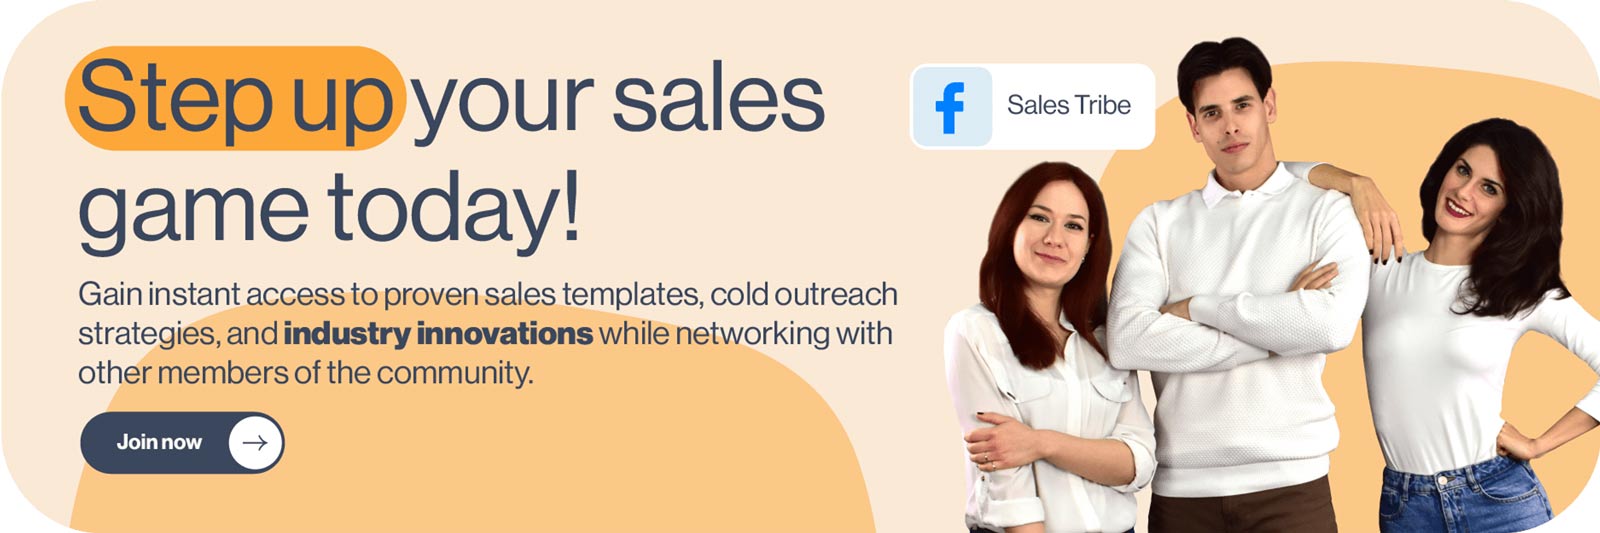 Join Sales Tribe community banner with text: Set up your sales game today